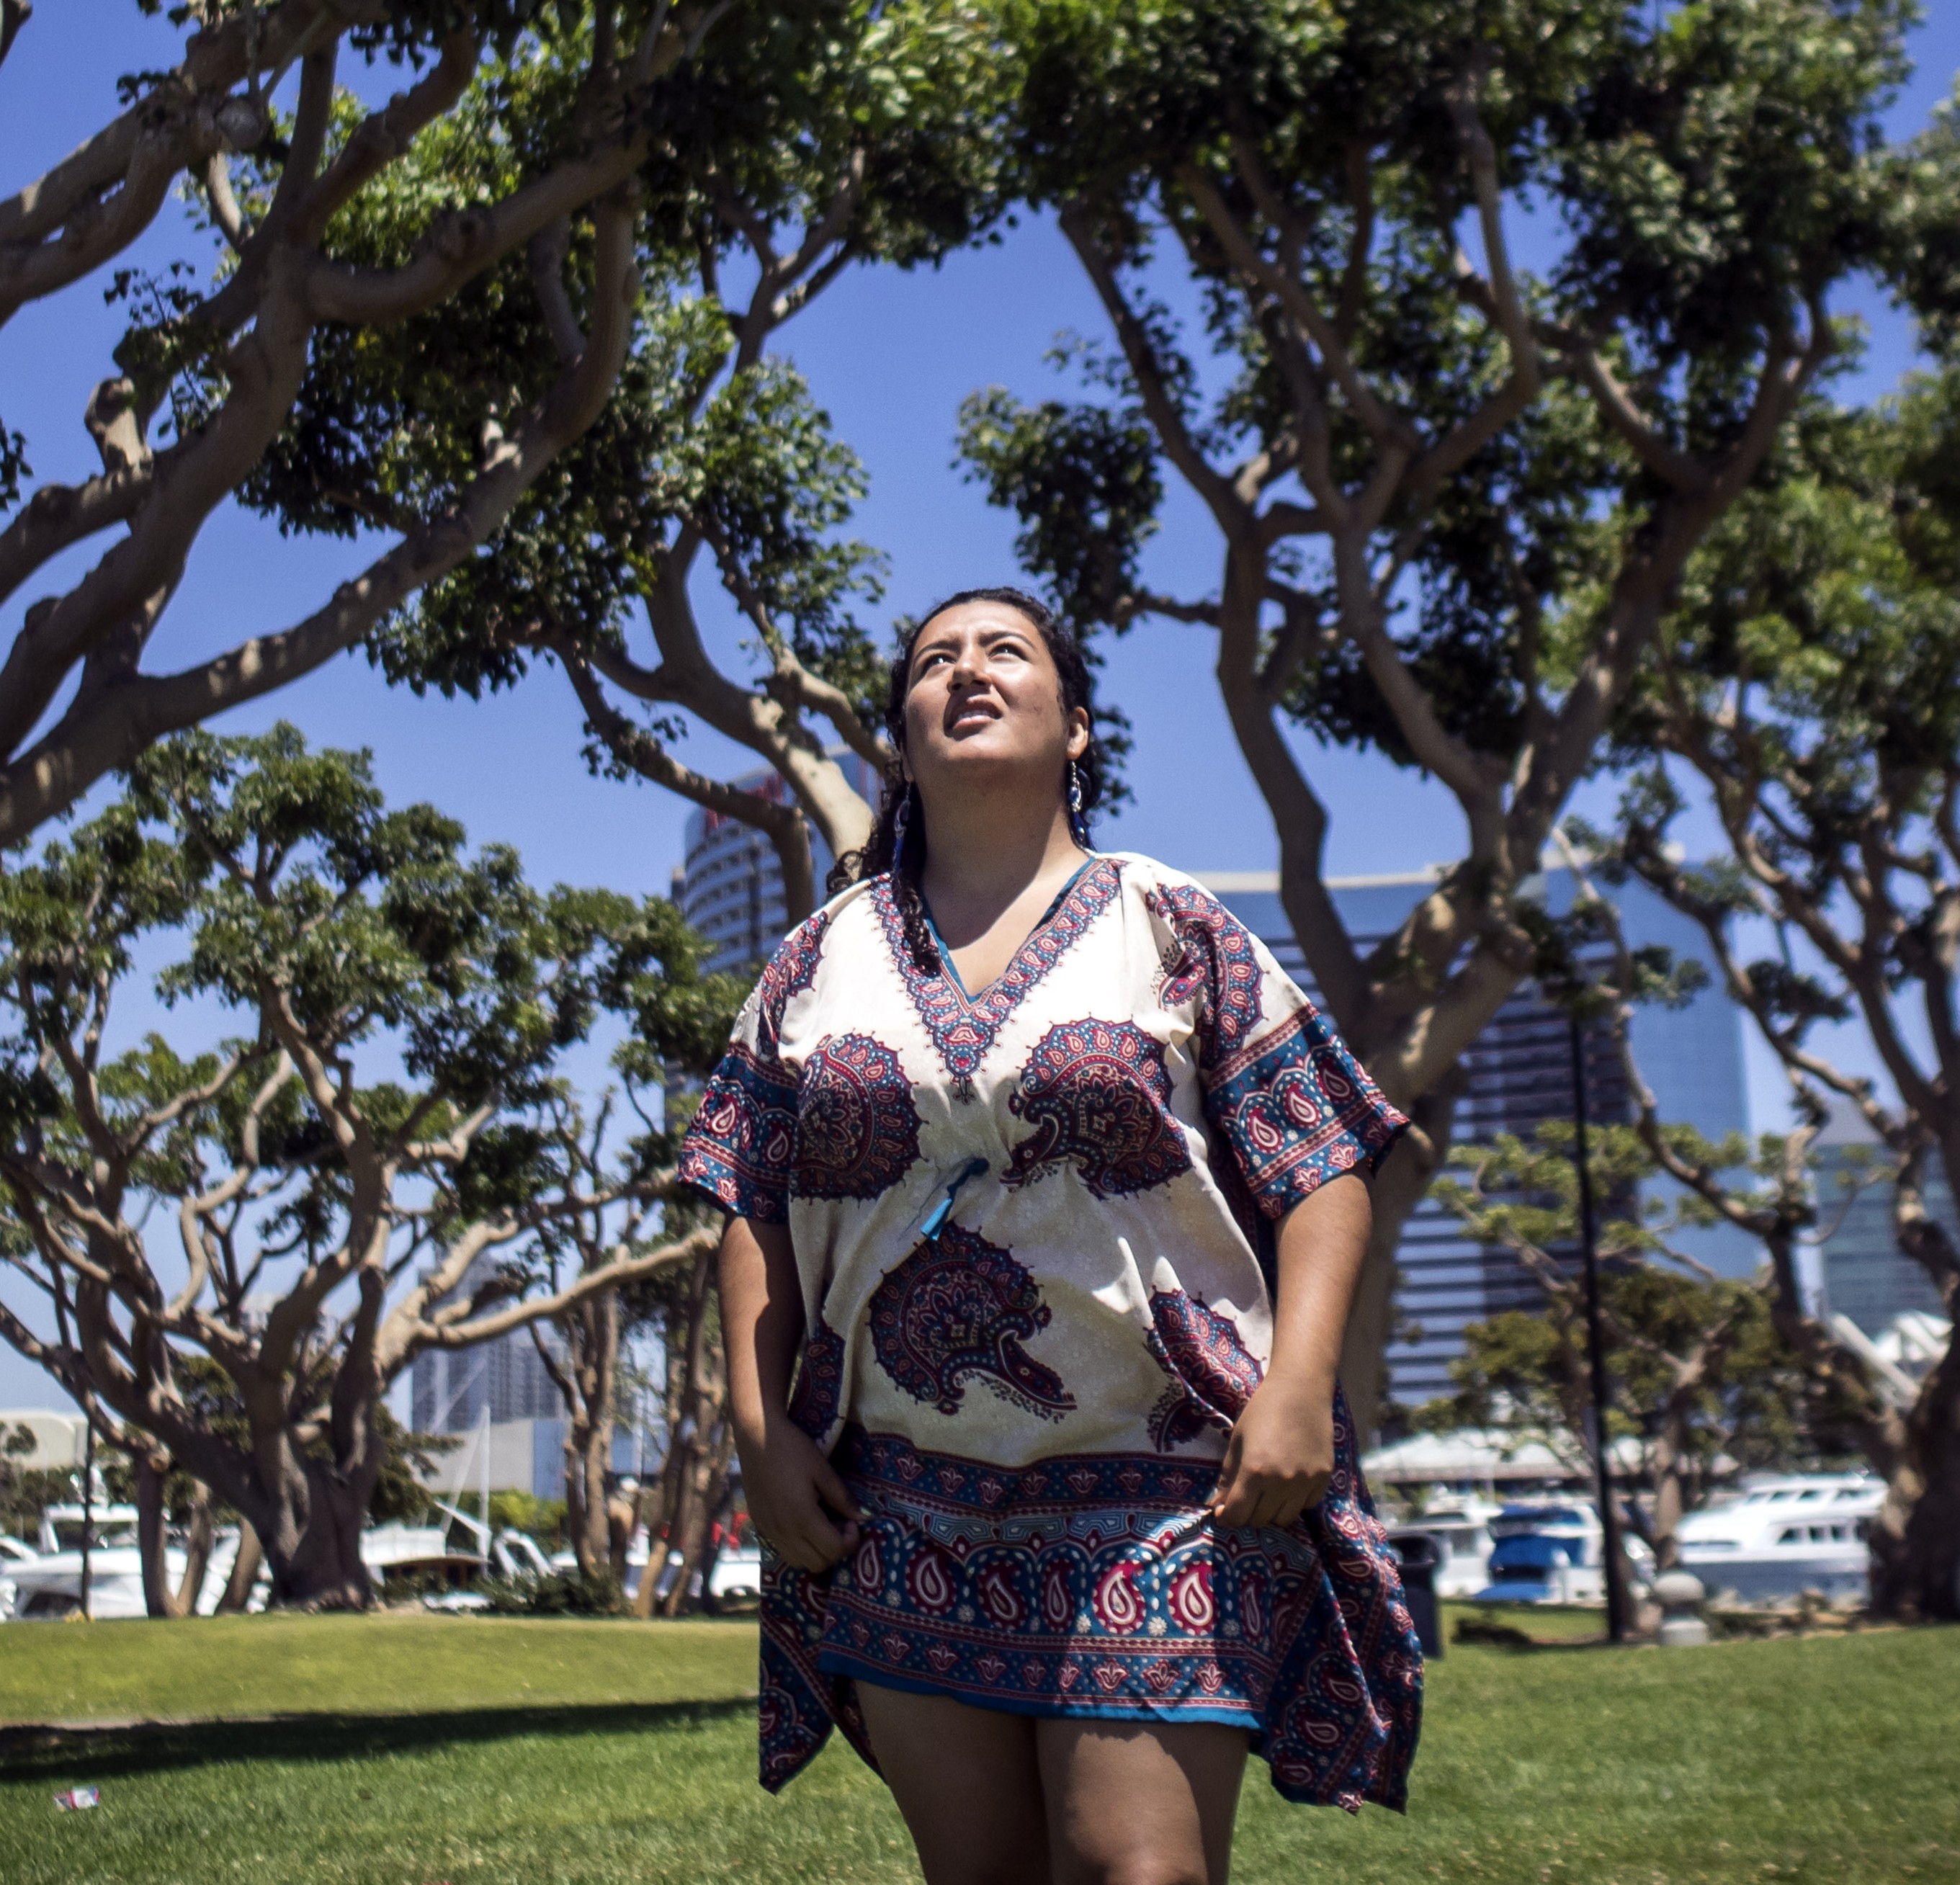 Jasmin heads out to the beach in San Diego on a windy day, to fly a kite. (Marvi Lacar/KQED)